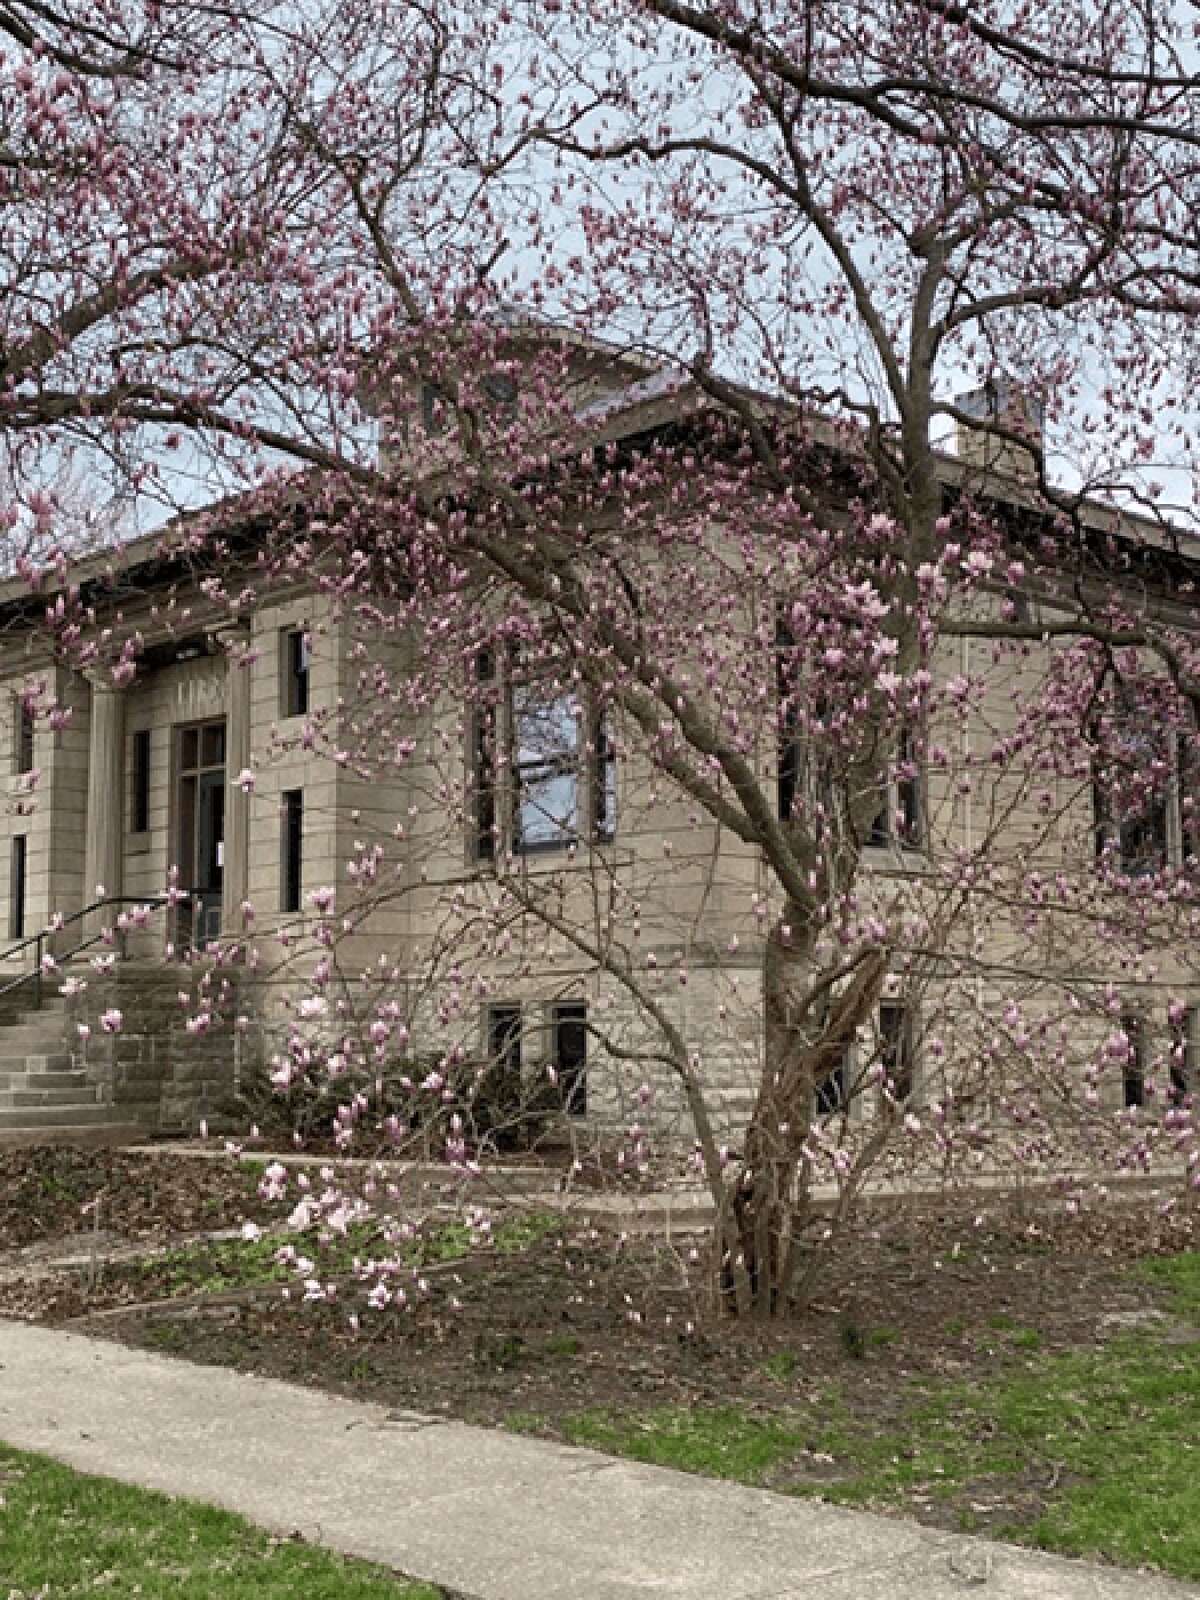 Jerseyville Public Library is a Carnegie Library in need of expansion to accommodate the library's growing offerings.